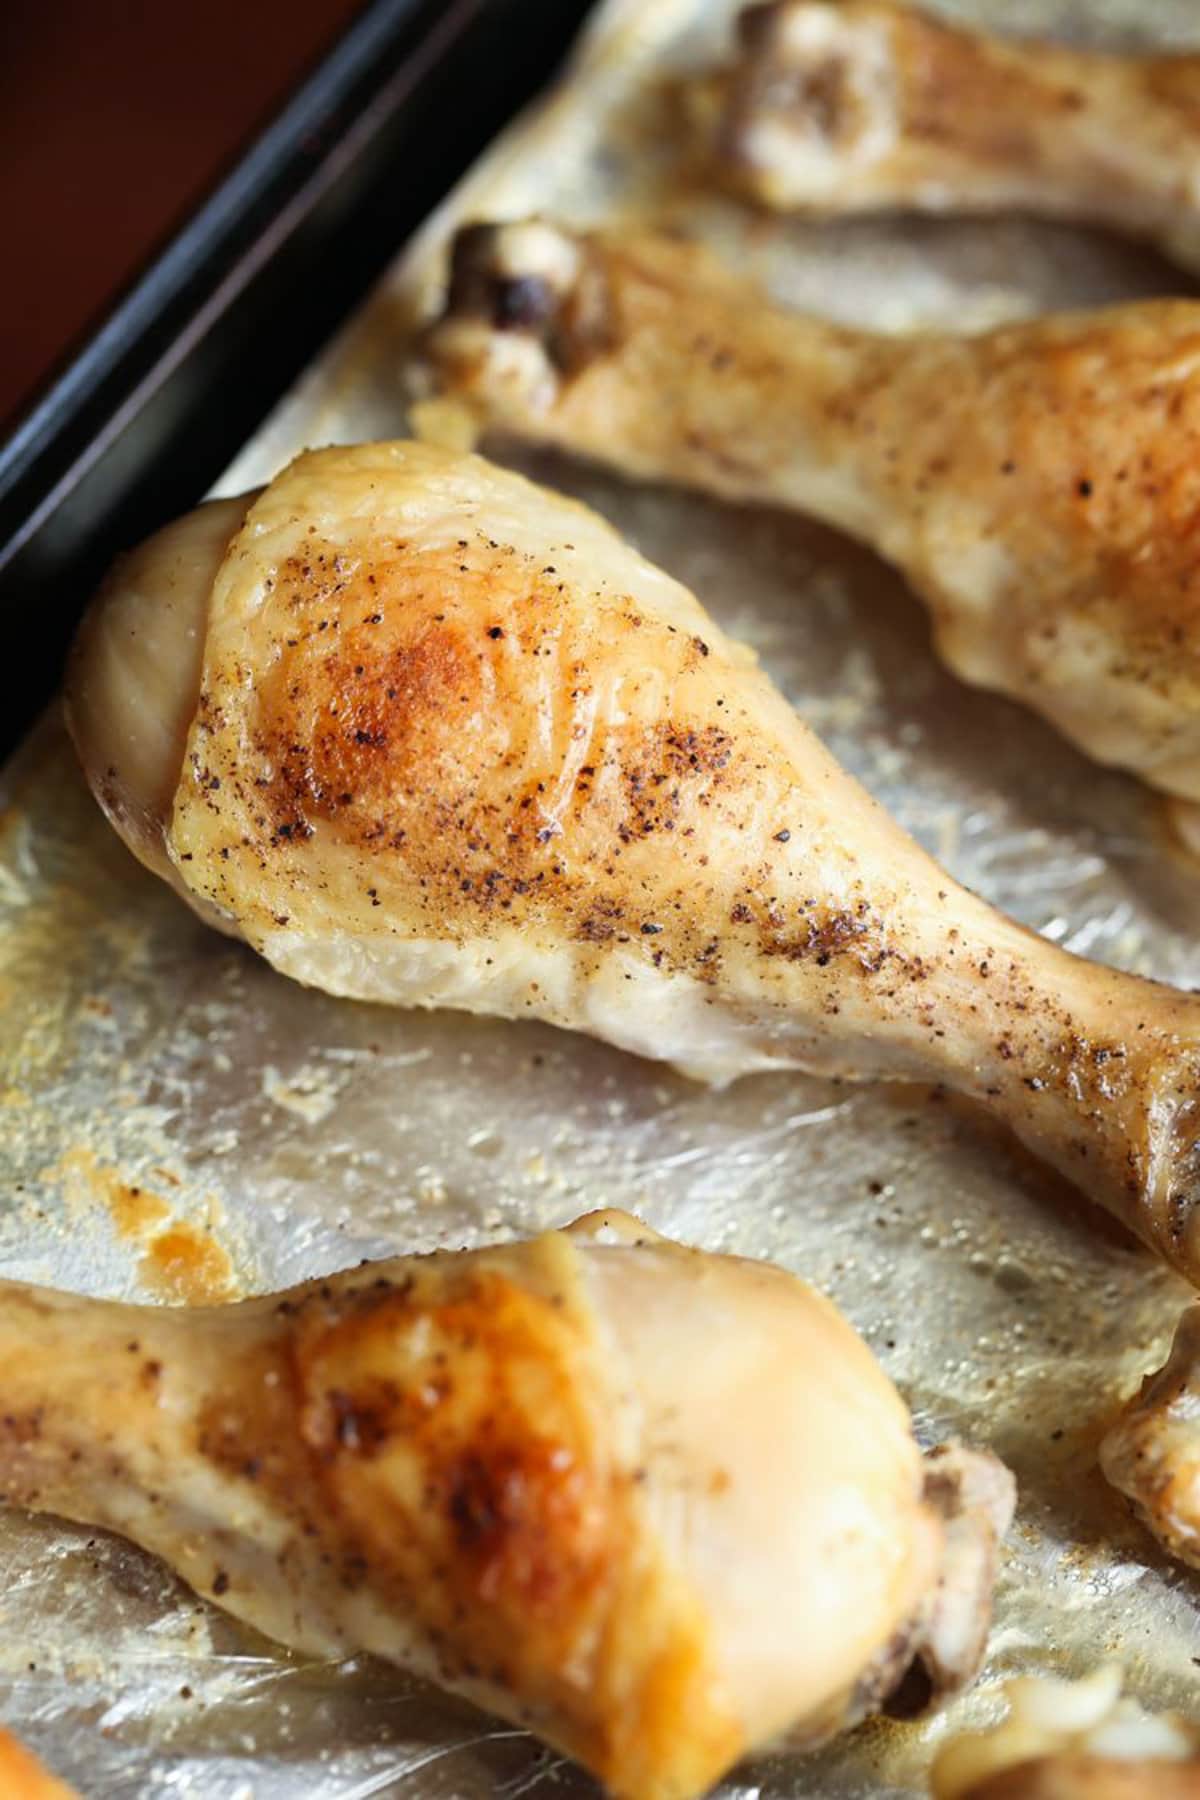 Oven baked chicken legs on a baking sheet